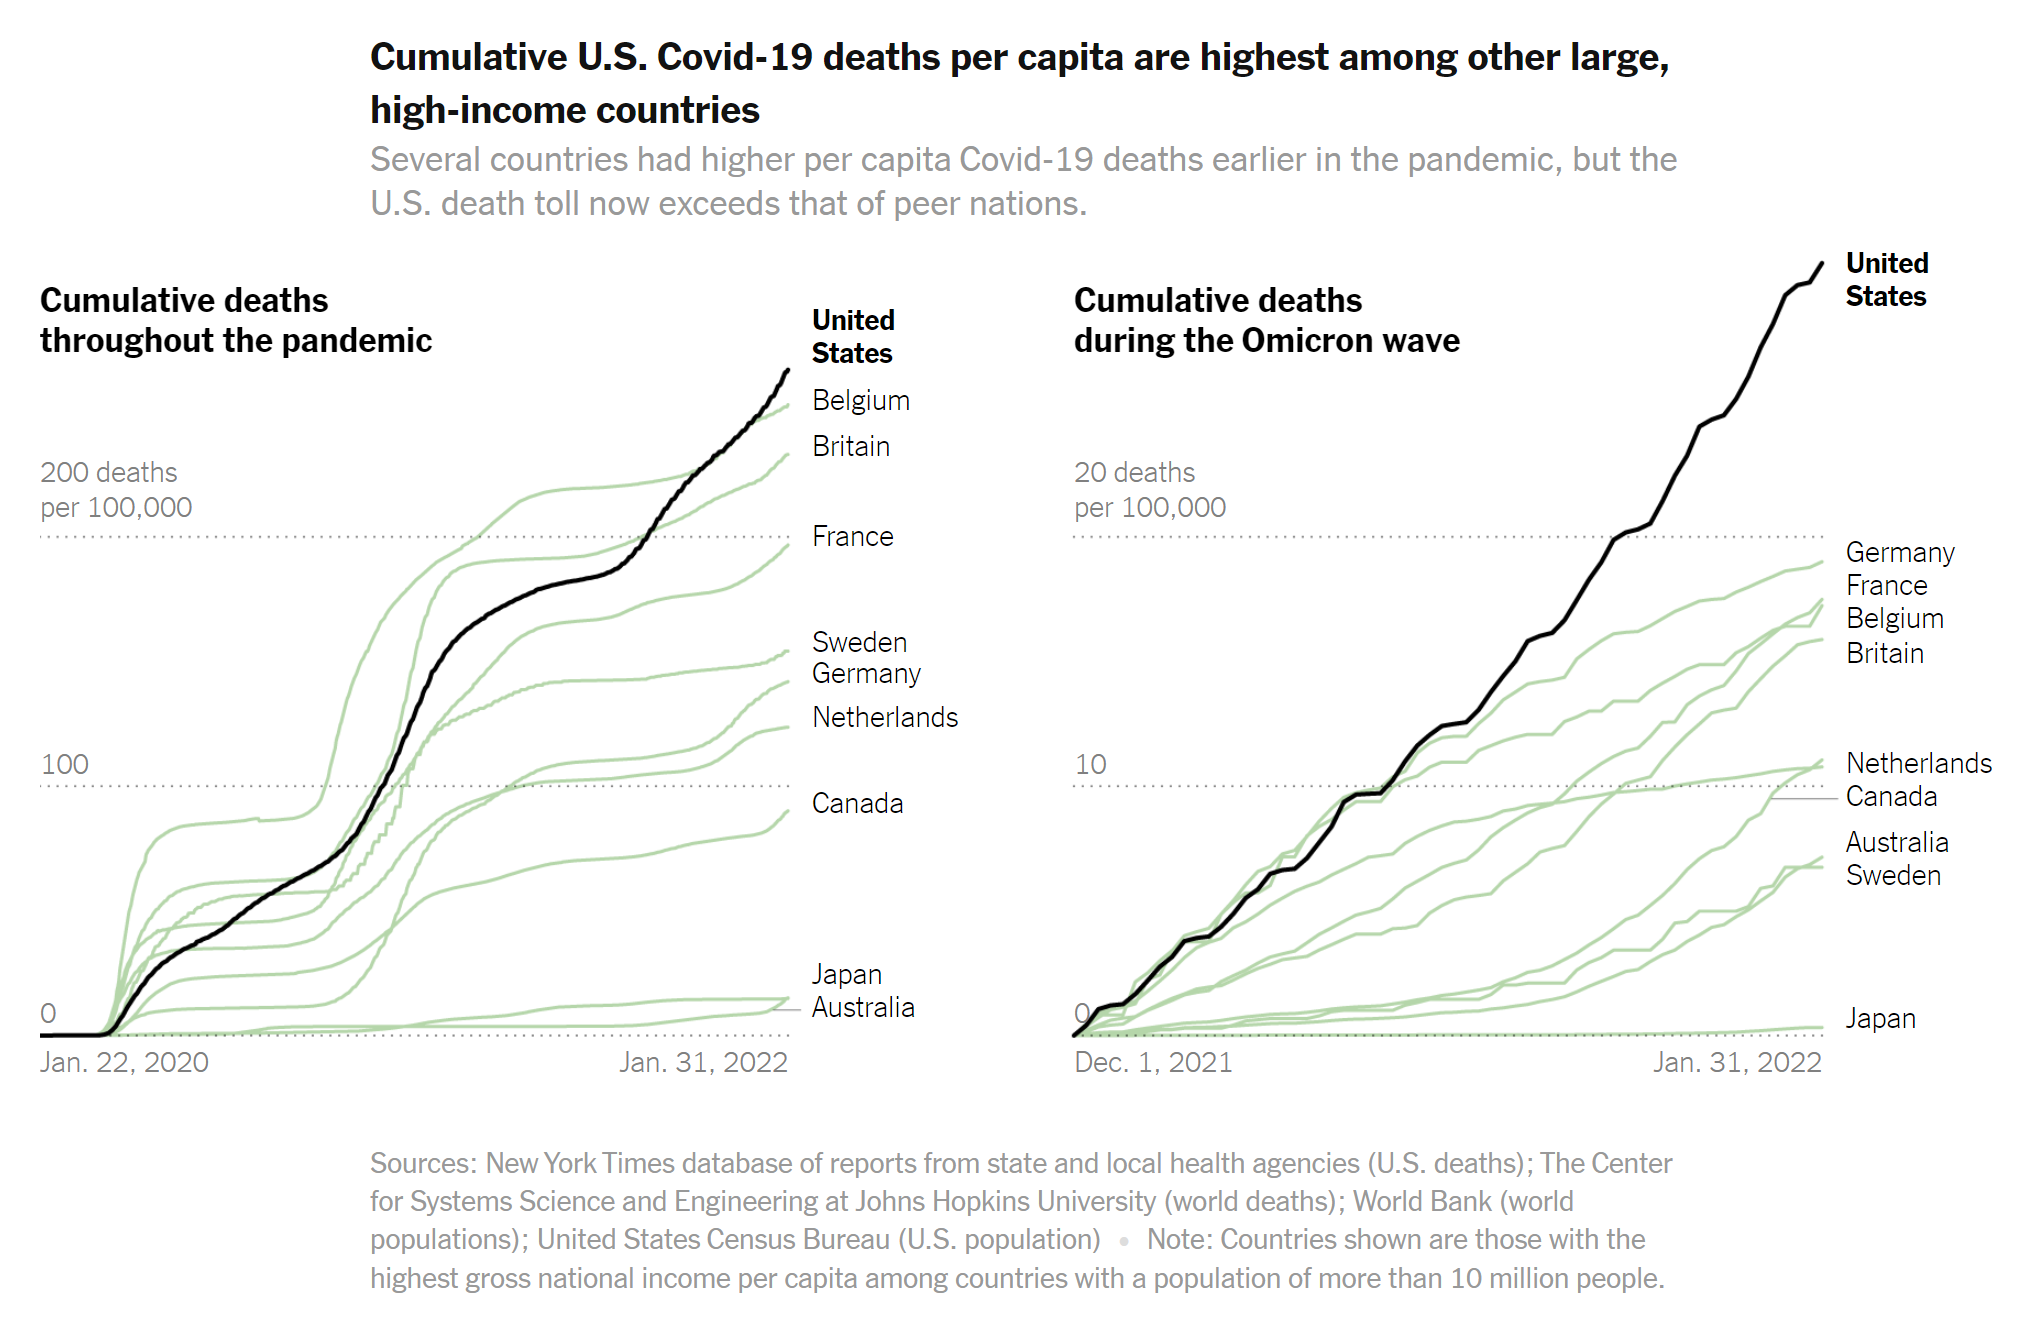 Cumulative Covid-19 deaths per capita among large, high-income countries, to 1 February 2022, showing cumulative deaths throughout the pandemic (left) and cumulative deaths during the Omicron wave (right). Cumulative U.S. Covid-19 deaths per capita are the highest among peer nations. Data: New York Times database of reports from state and local health agencies (U.S. deaths); The Center for Systems Science and Engineering at Johns Hopkins University (world deaths); World Bank (world populations); United States Census Bureau (U.S. population) Graphic: The New York Times